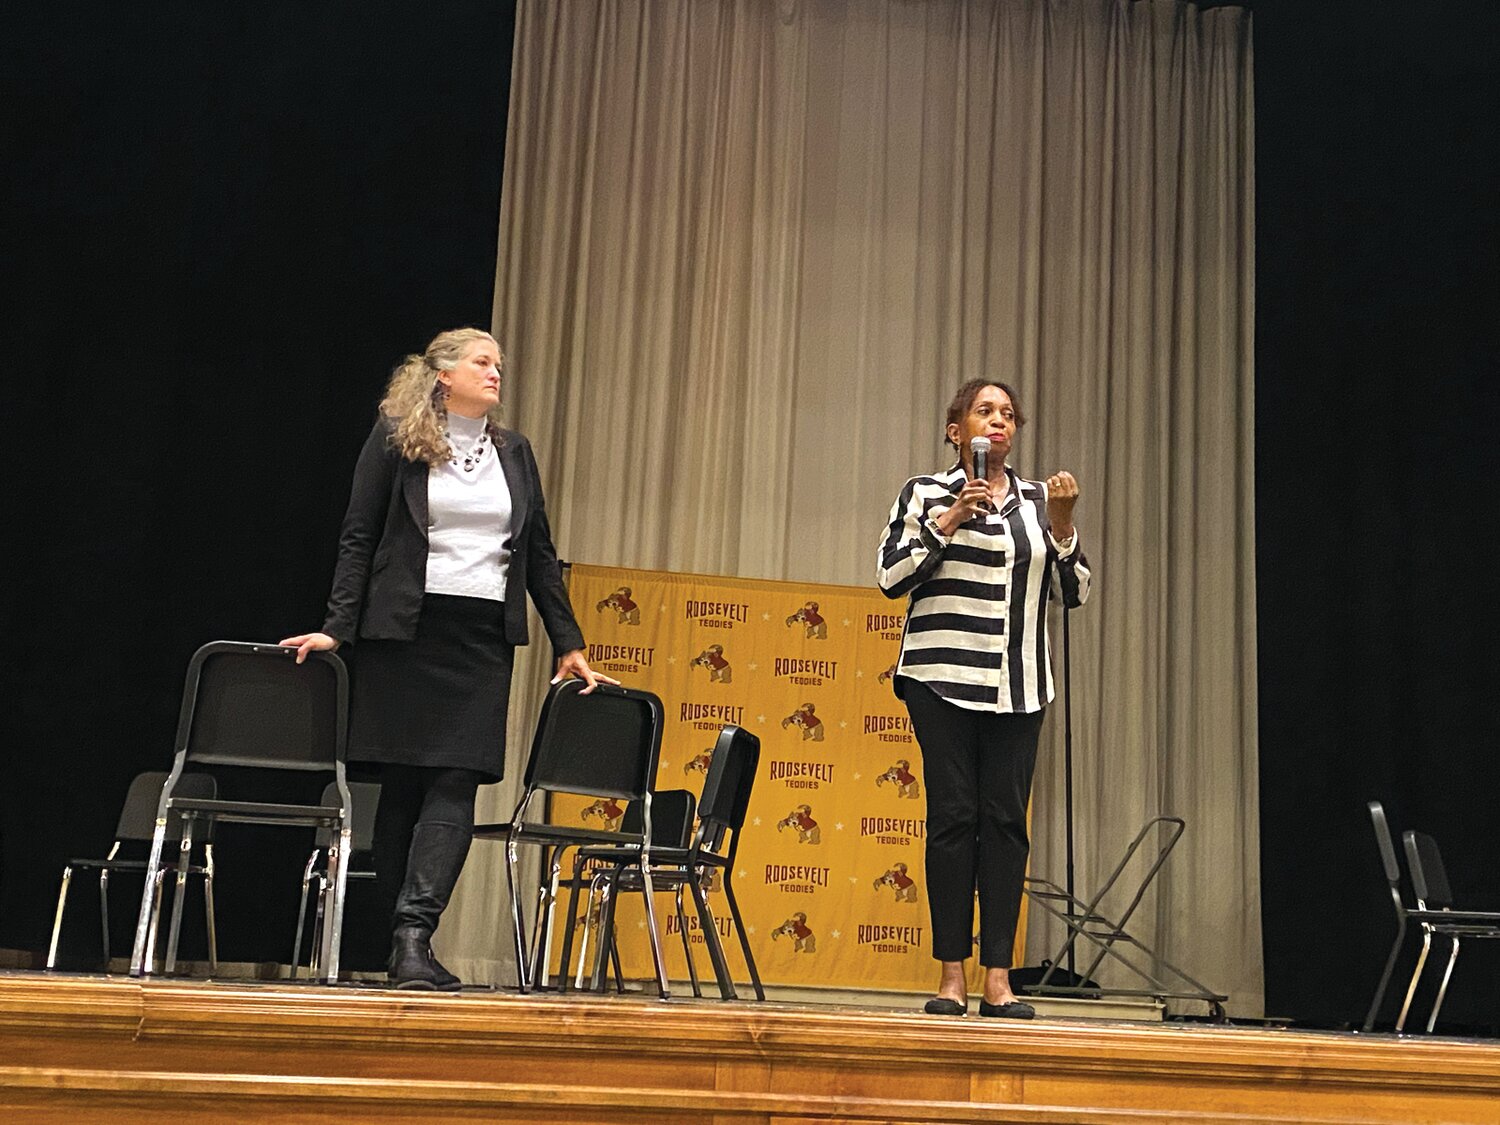 Karen DeYoung of DeYoung Consulting Service (right) and Minneapolis Interim Chief Operating Officer (COO) Heather Johnston talk to about 155 people about the 3rd Precinct on April 18 at Roosevelt High School.